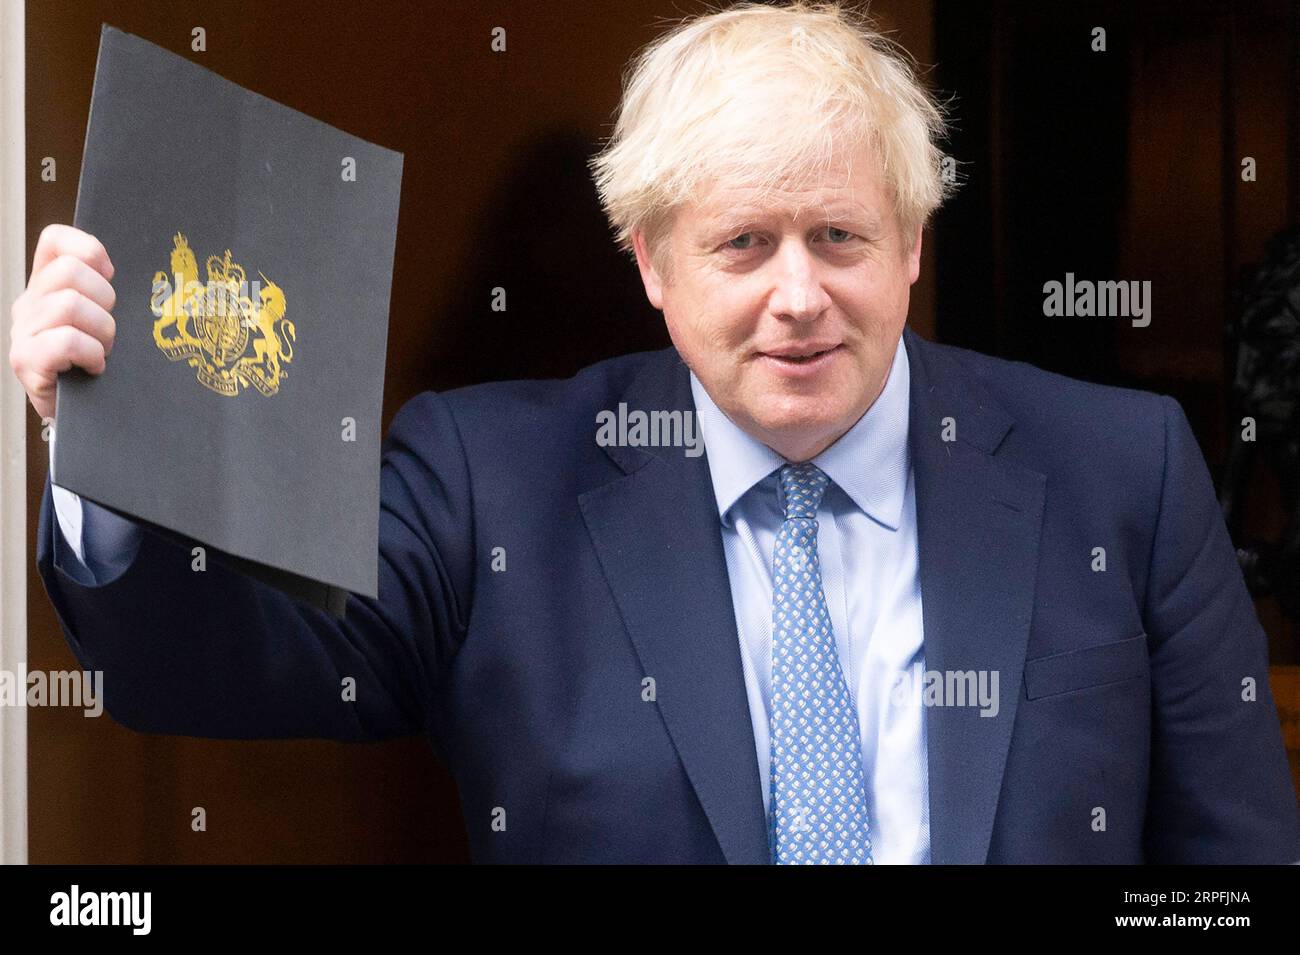 190925 -- LONDON, Sept. 25, 2019 Xinhua -- British Prime Minister Boris Johnson leaves 10 Downing Street to attend the reopening of the Parliament in London, Britain, on Sept. 25, 2019. British Prime Minister Boris Johnson faced enormous pressure as the parliament re-opened Wednesday after the Supreme Court ruled his act to suspend the parliament for five weeks was unlawful. Photo by Ray Tang/Xinhua BRITAIN-LONDON-PARLIAMENT-REOPENING PUBLICATIONxNOTxINxCHN Stock Photo